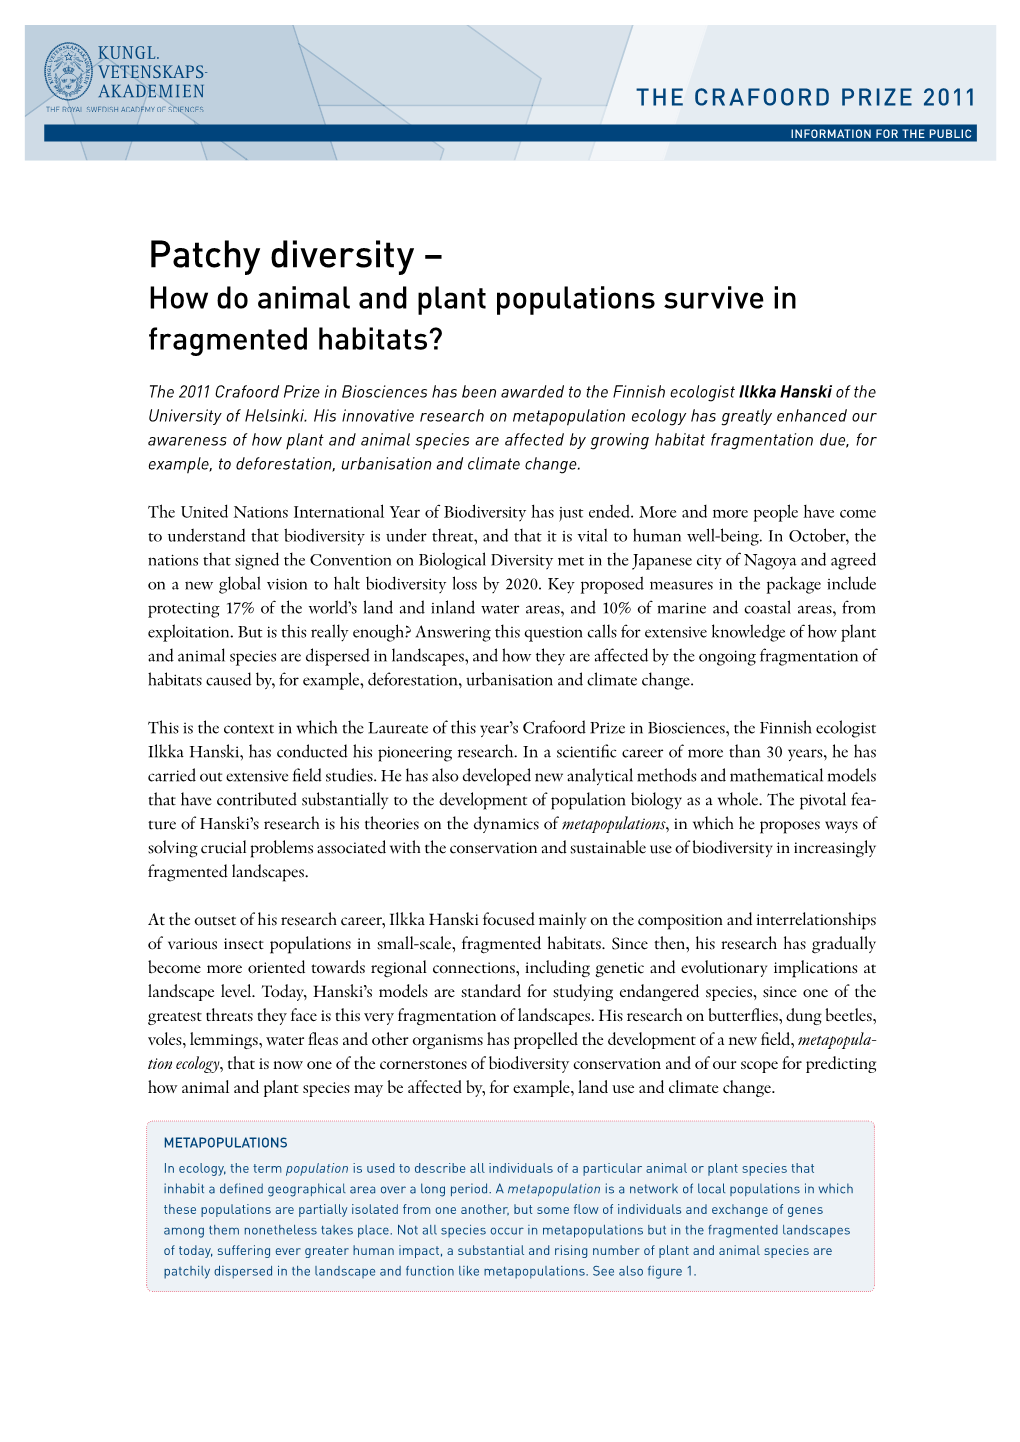 Patchy Diversity – How Do Animal and Plant Populations Survive in Fragmented Habitats?